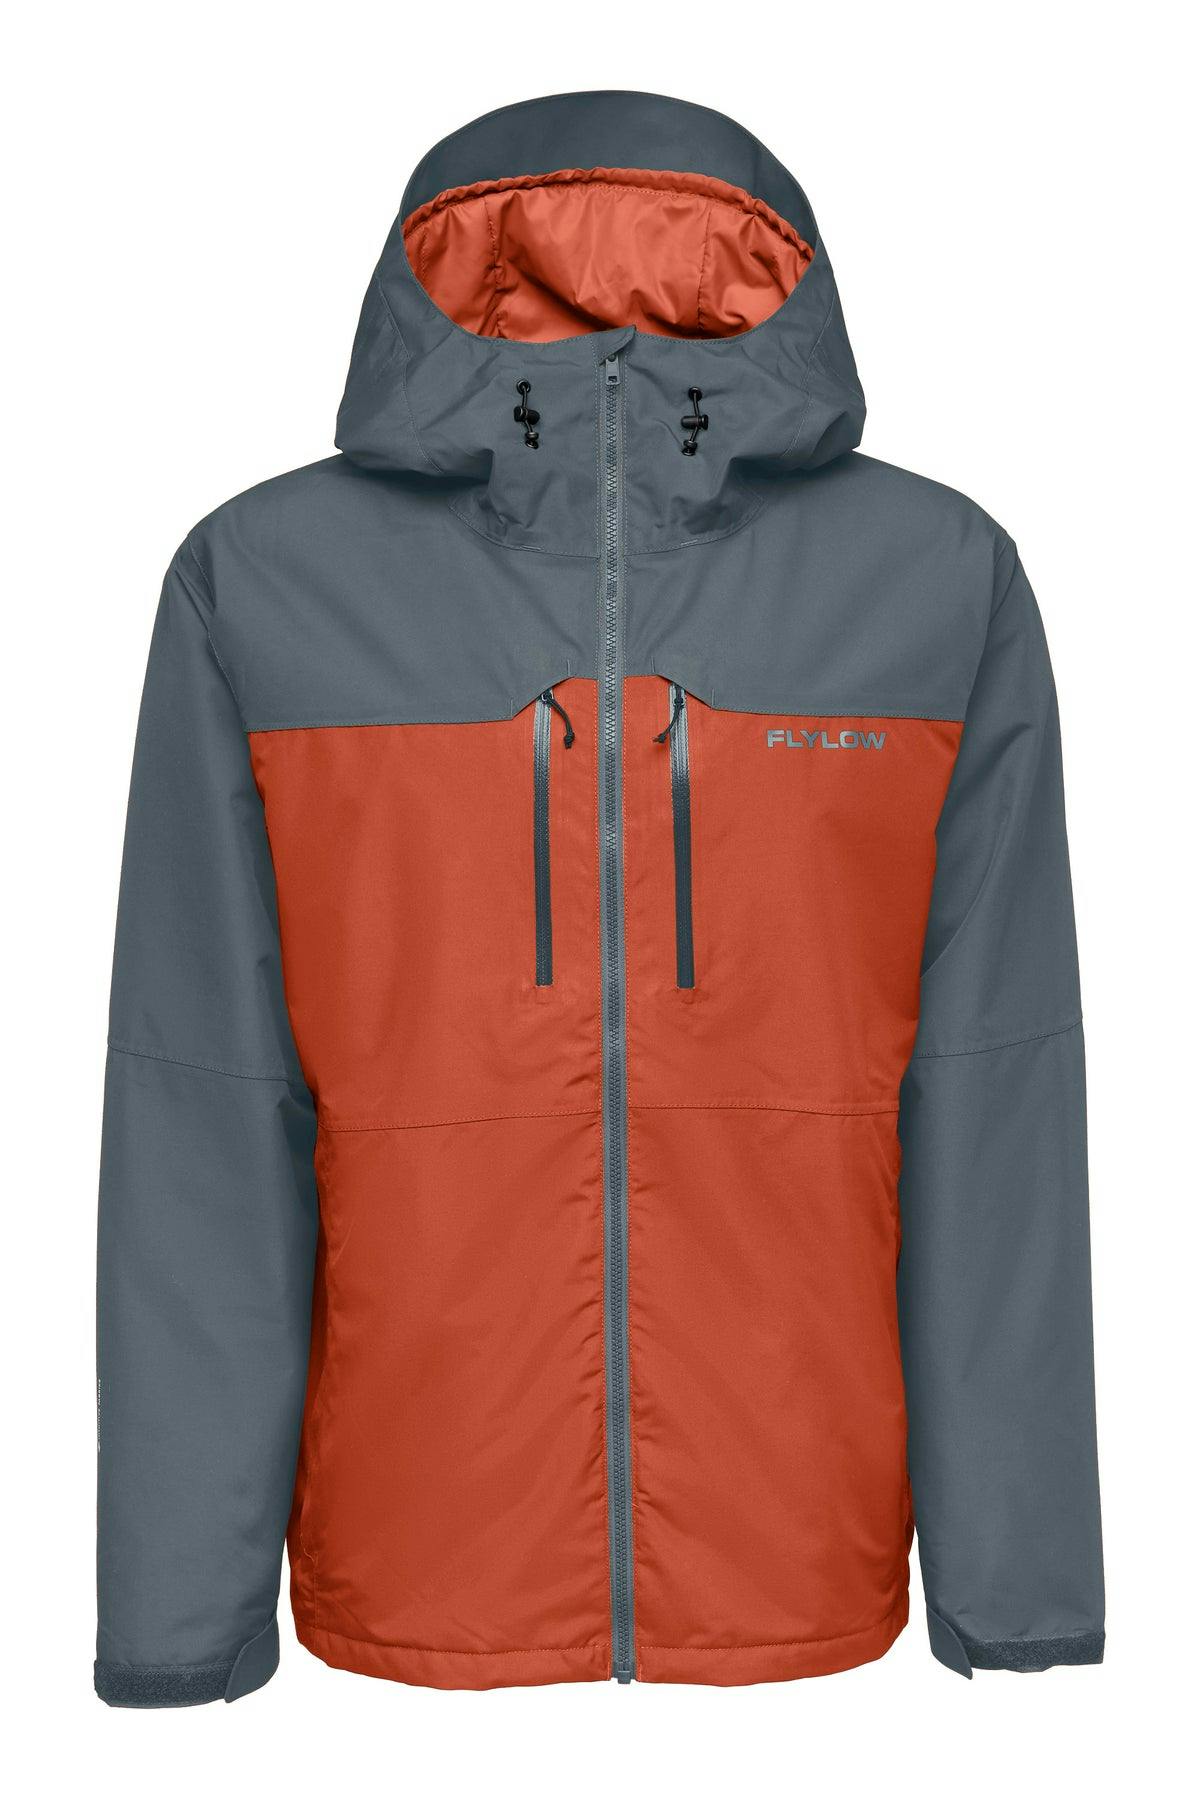 Flylow Men's Roswell 2L Insulated Jacket